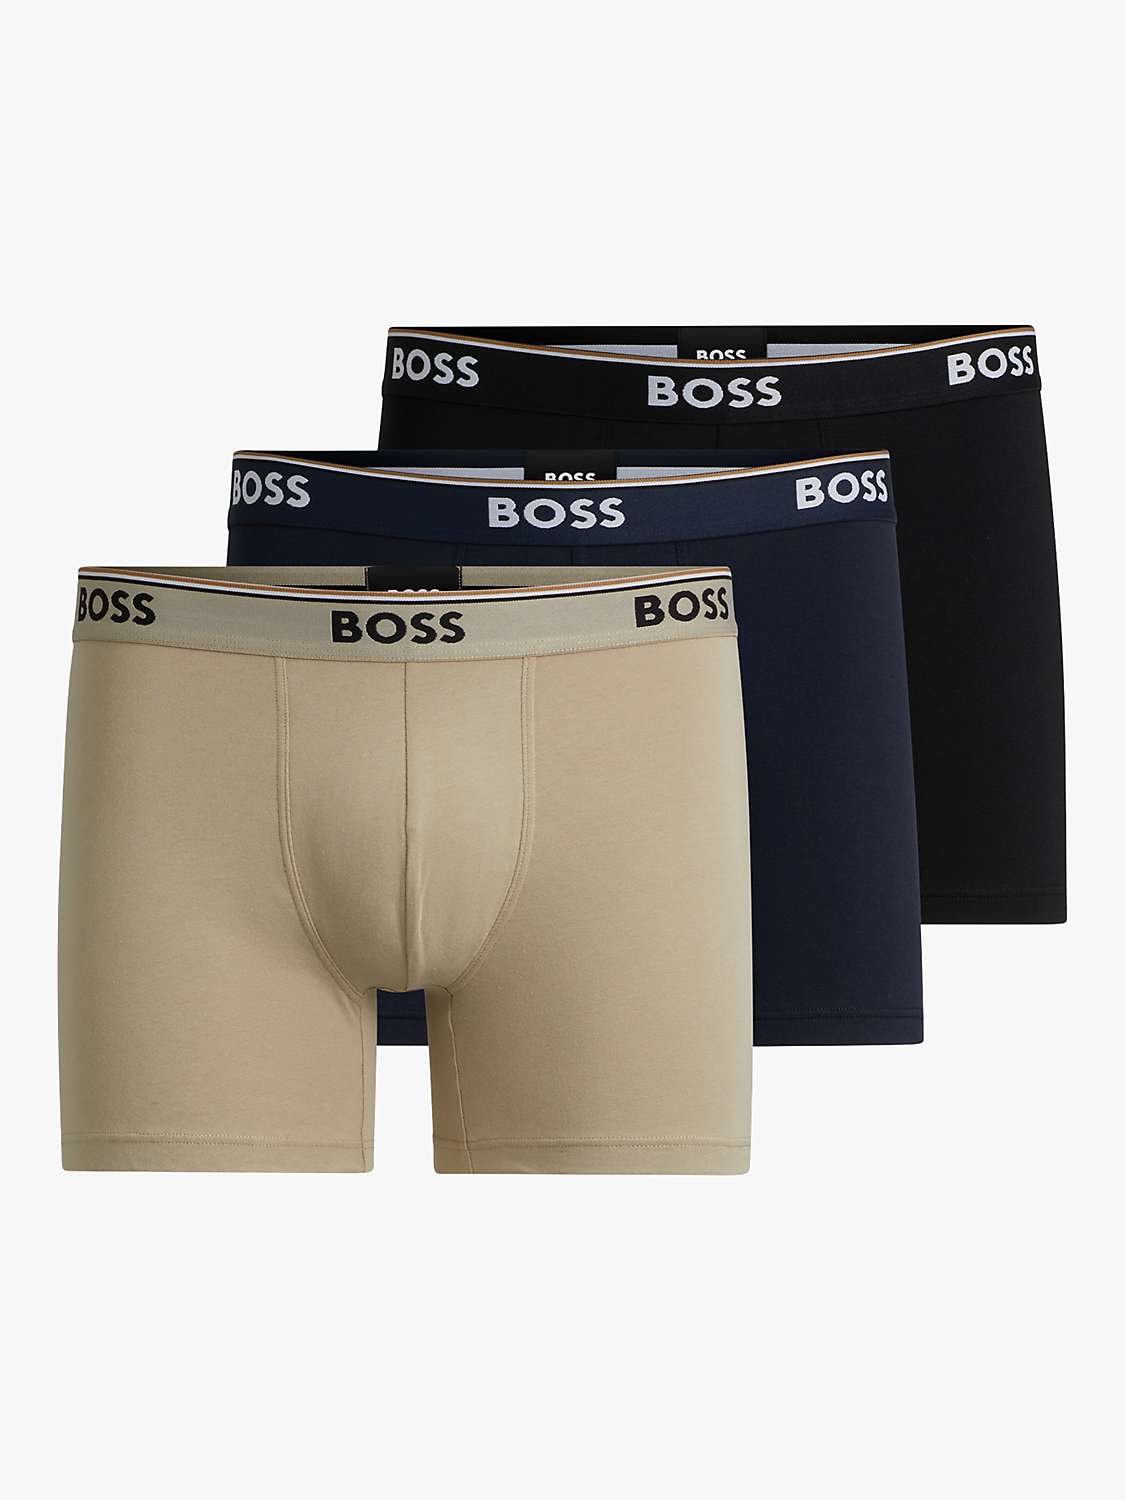 Buy BOSS Logo Waist Cotton Stretch Boxer Shorts, Pack of 3, Beige/Multi Online at johnlewis.com